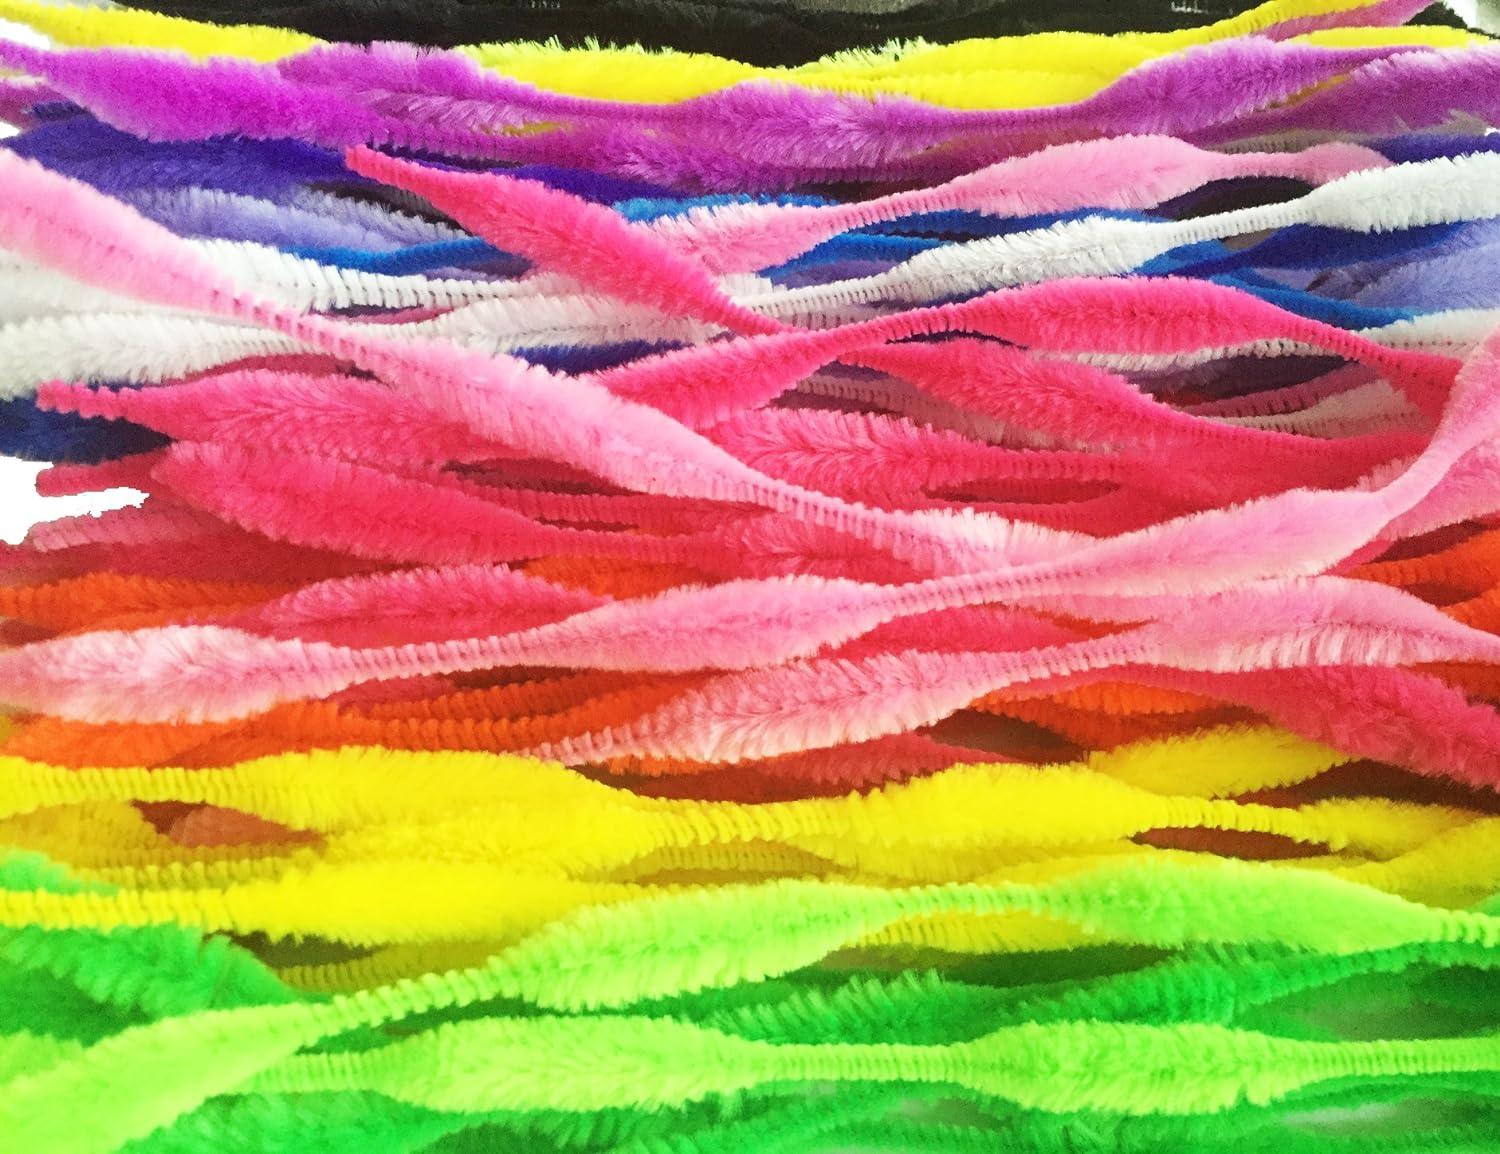 Caryko Super Fuzzy Chenille Stems Pipe Cleaners Pack of 100 (Hot Pink)